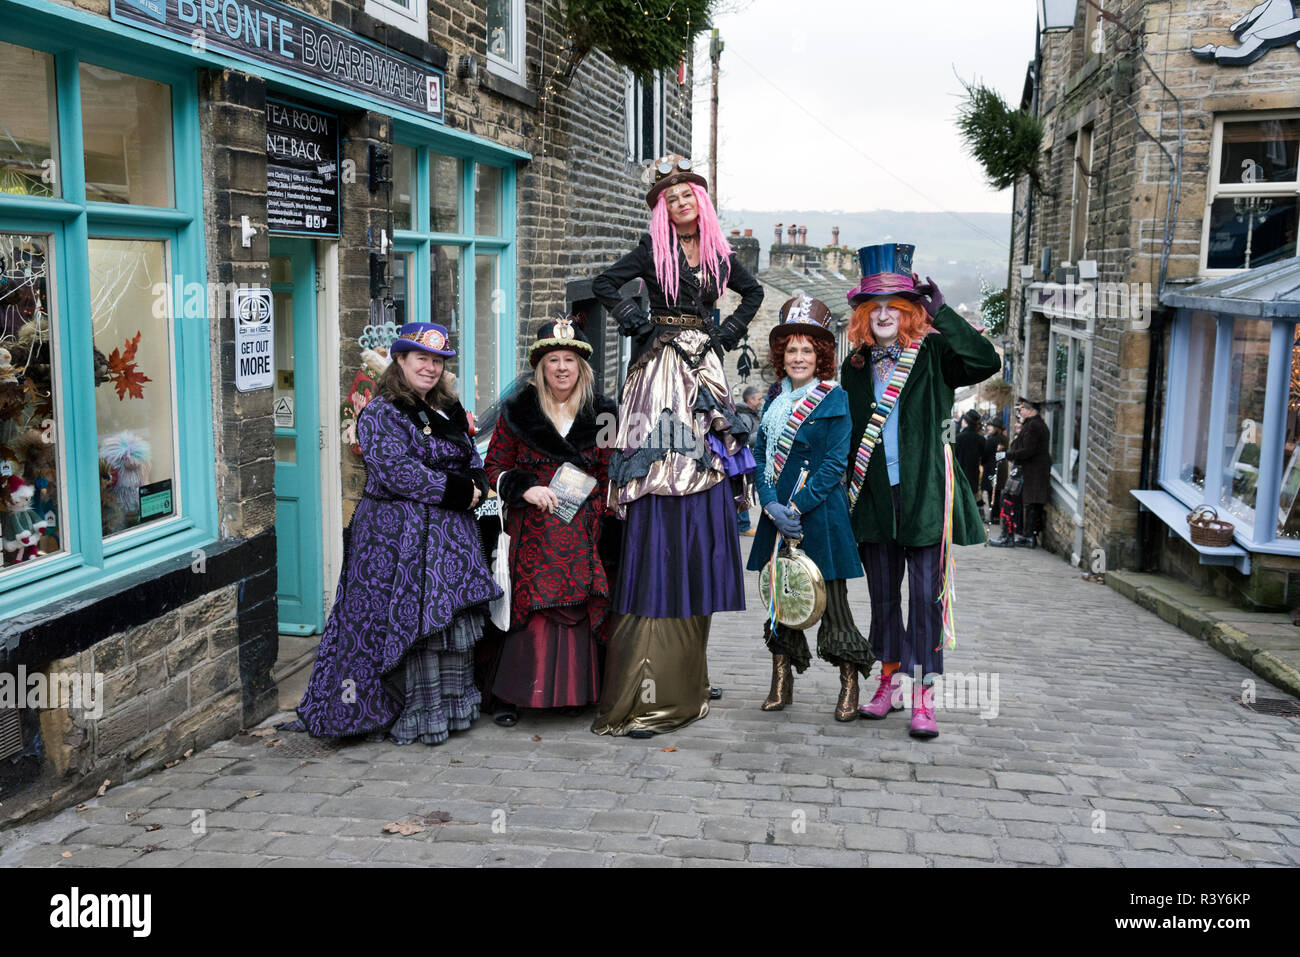 Haworth, West Yorkshire, UK. 24th Nov 2018. The annual steampunk weekend, Haworth, West Yorkshire, UK. The weekend attracts steampunk enthusiasts from all over, with some very fashionable outfits to be seen in the Bronte village's cobbled streets. Credit: John Bentley/Alamy Live News Stock Photo